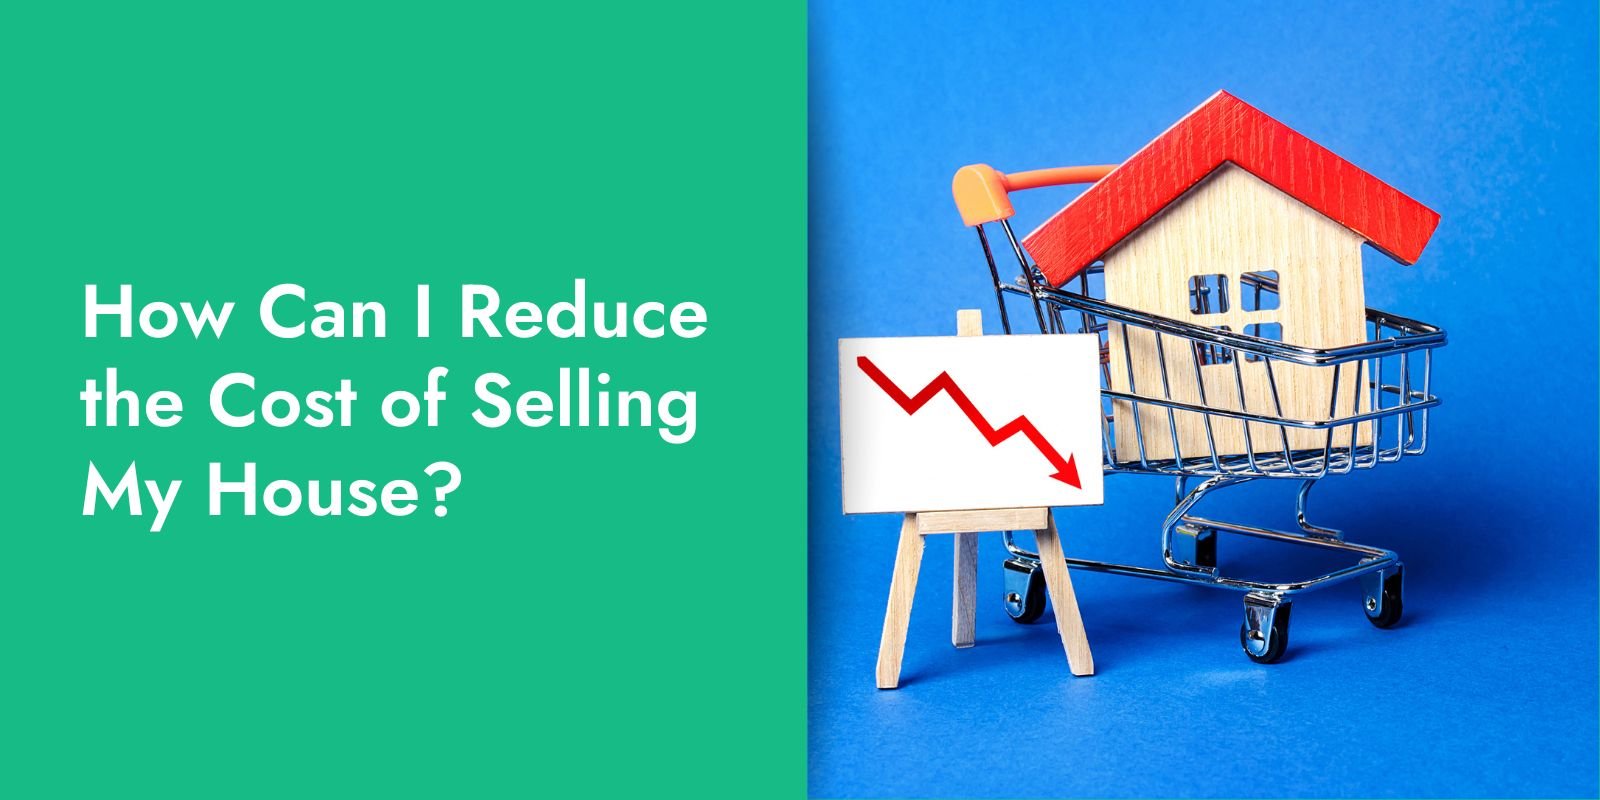 How Can I Reduce The Cost of Selling My House